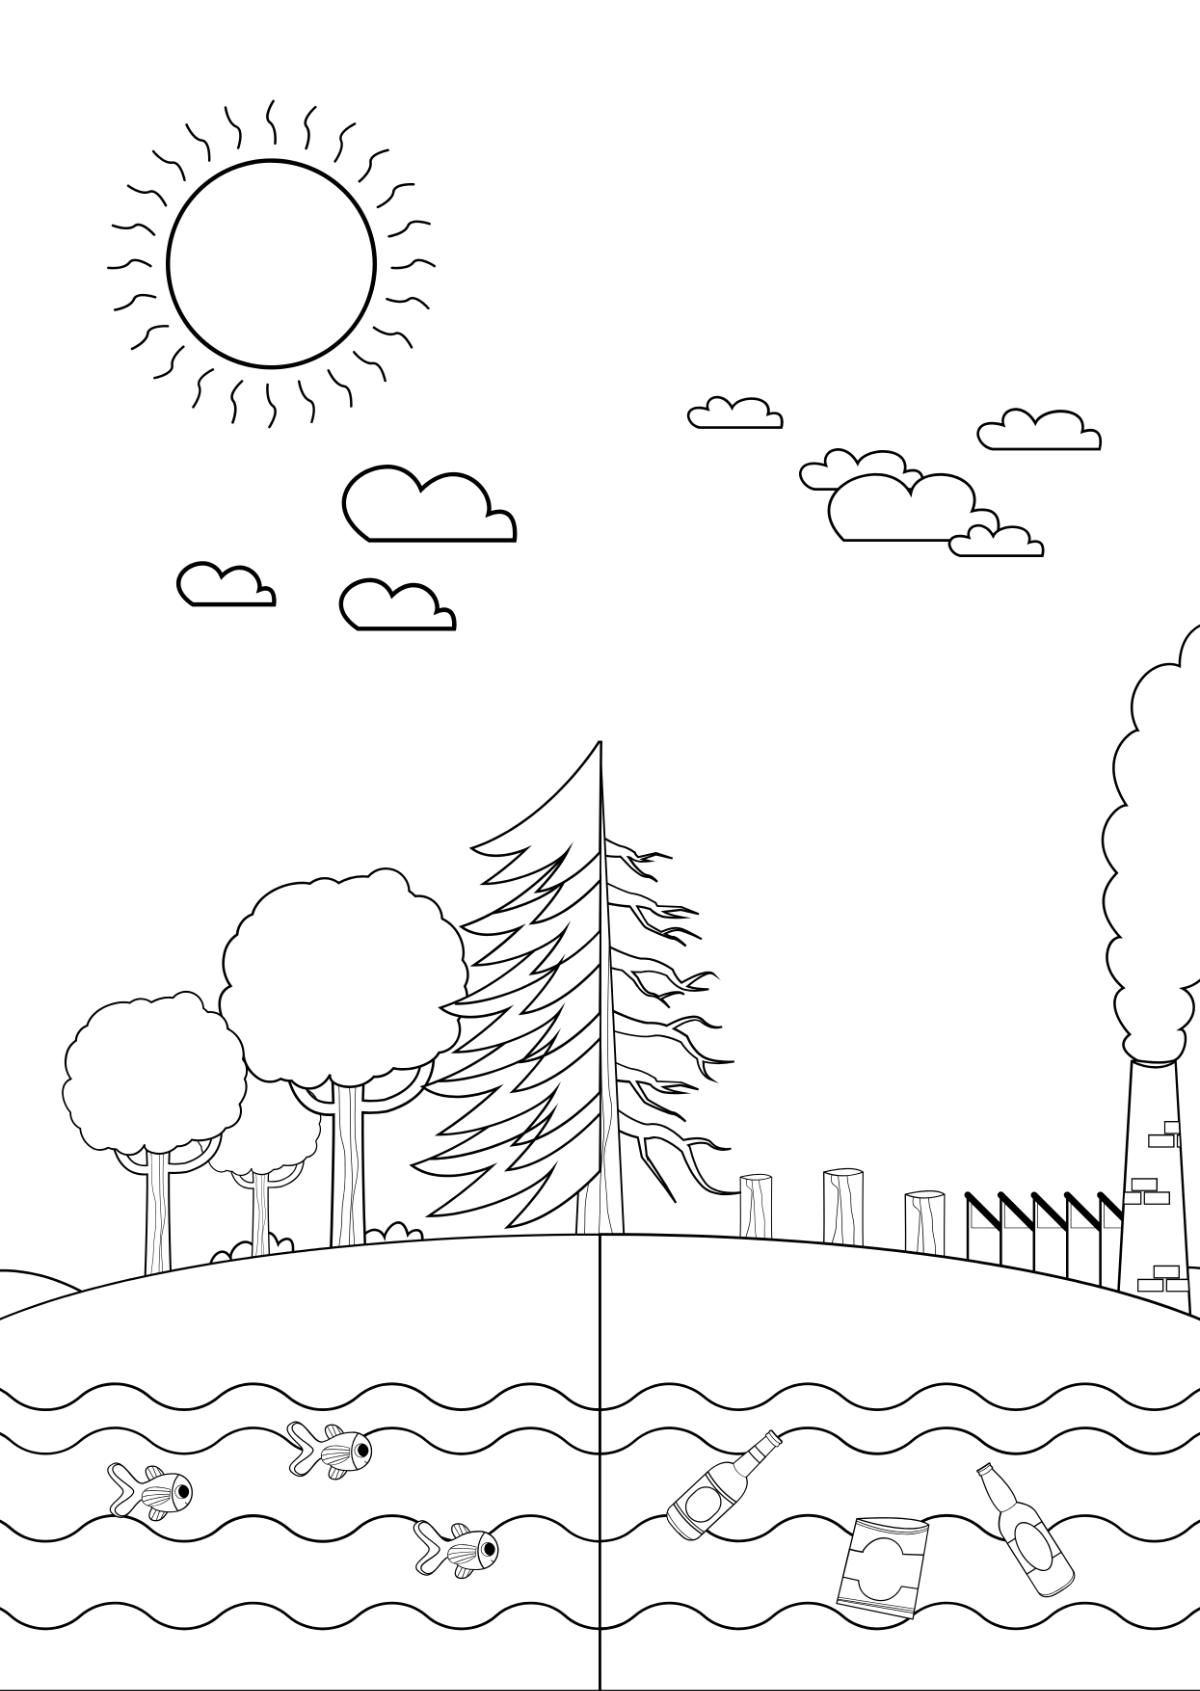 Environment Drawing For Competition